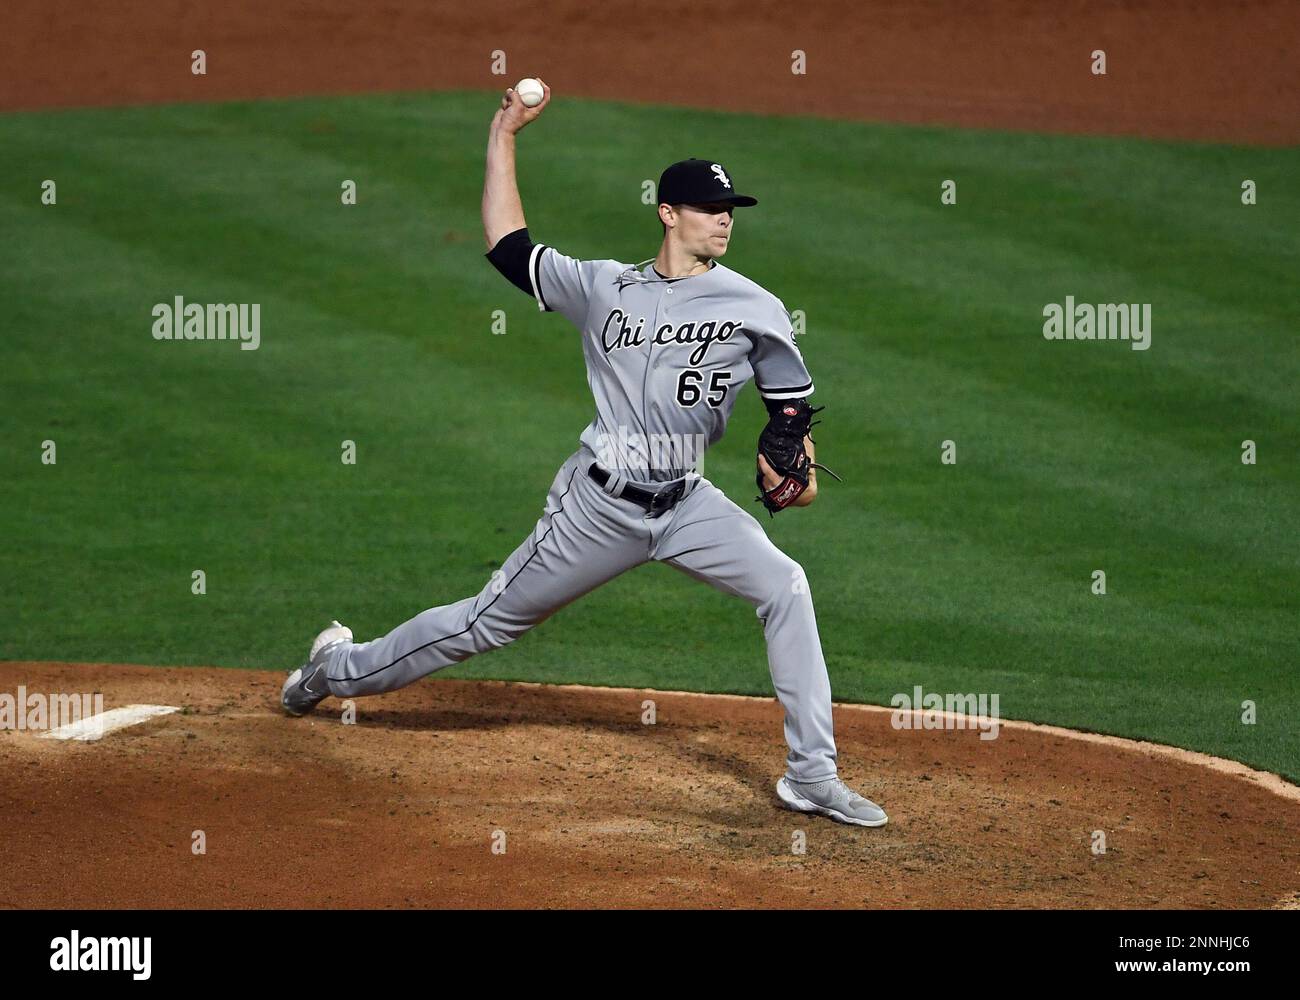 ANAHEIM, CA - APRIL 04: Chicago White Sox pitcher Codi Heuer (65) pitching  in the fifth inning of a game against the Los Angeles Angels played on  April 4, 2021 at Angel